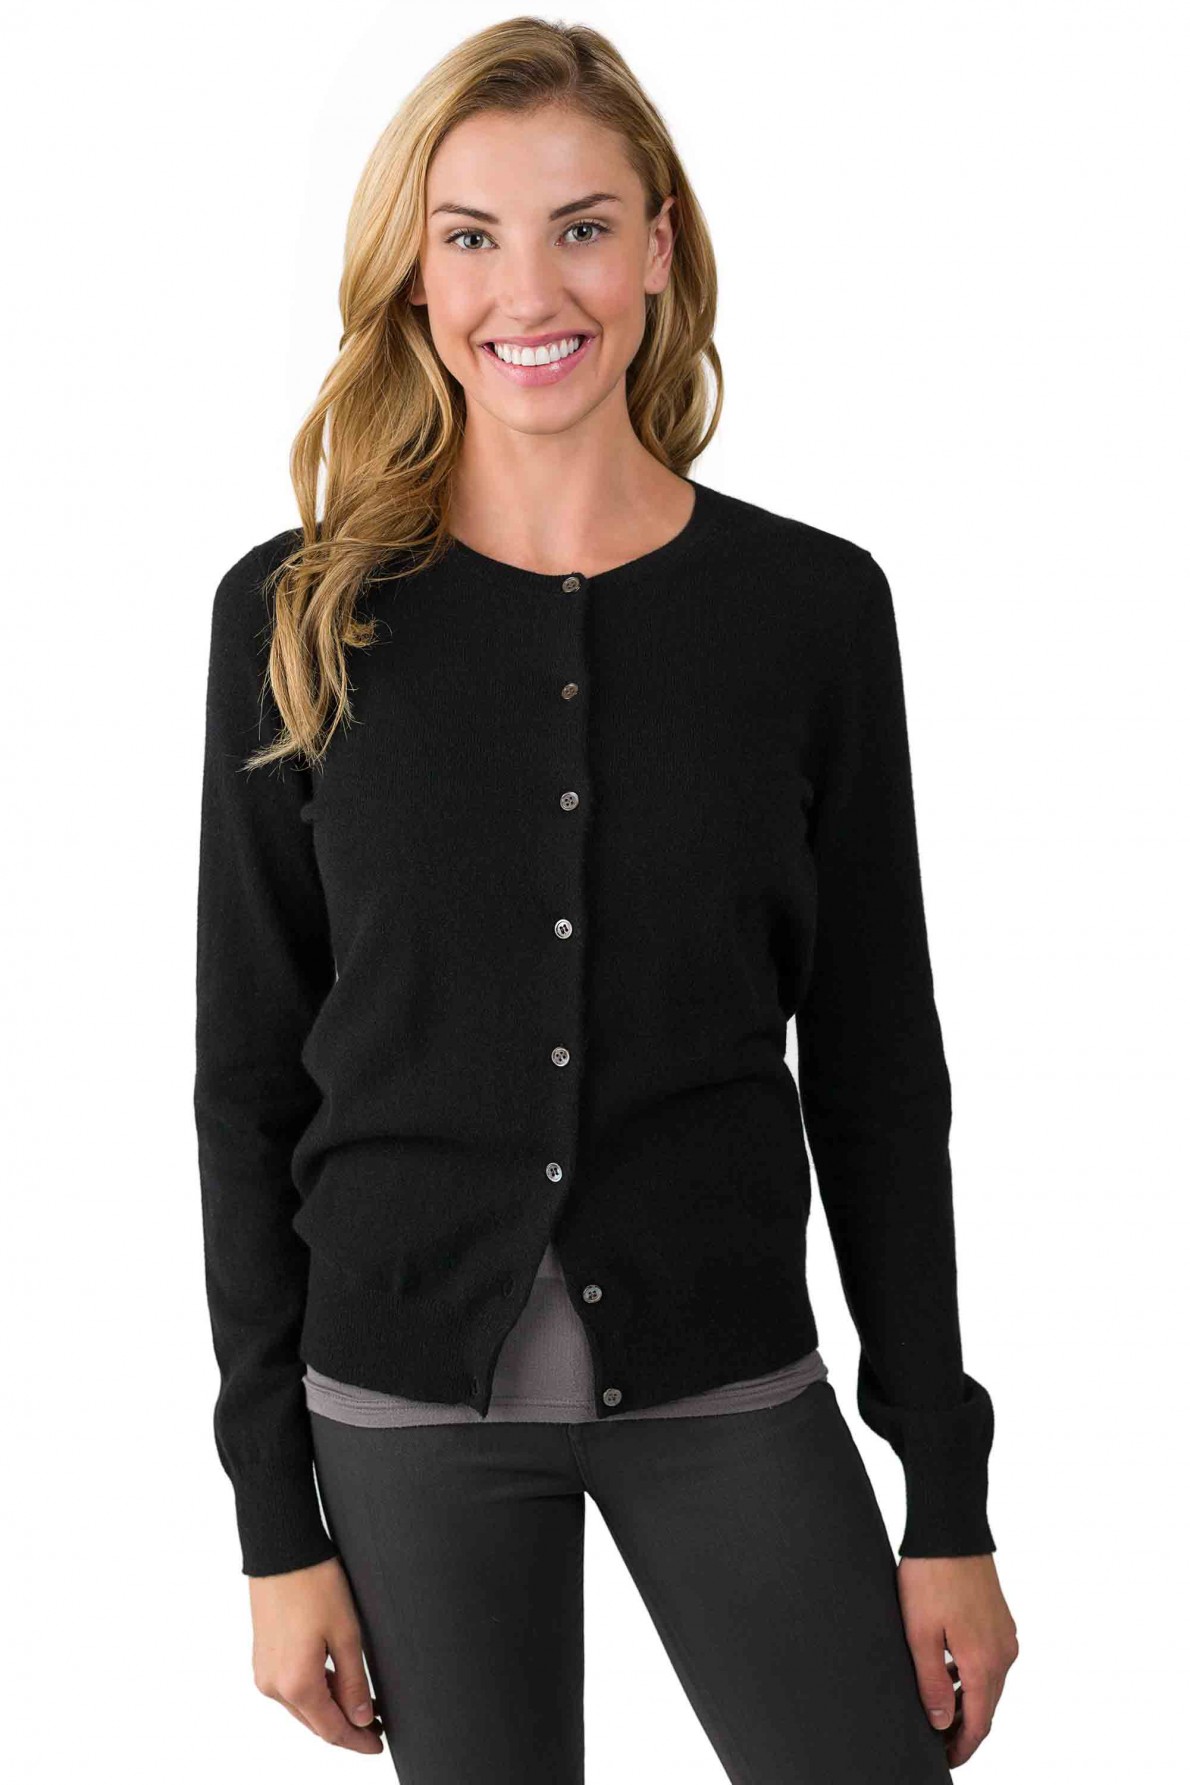 cashmere cardigan black cashmere button front cardigan sweater right front view bfpoghs